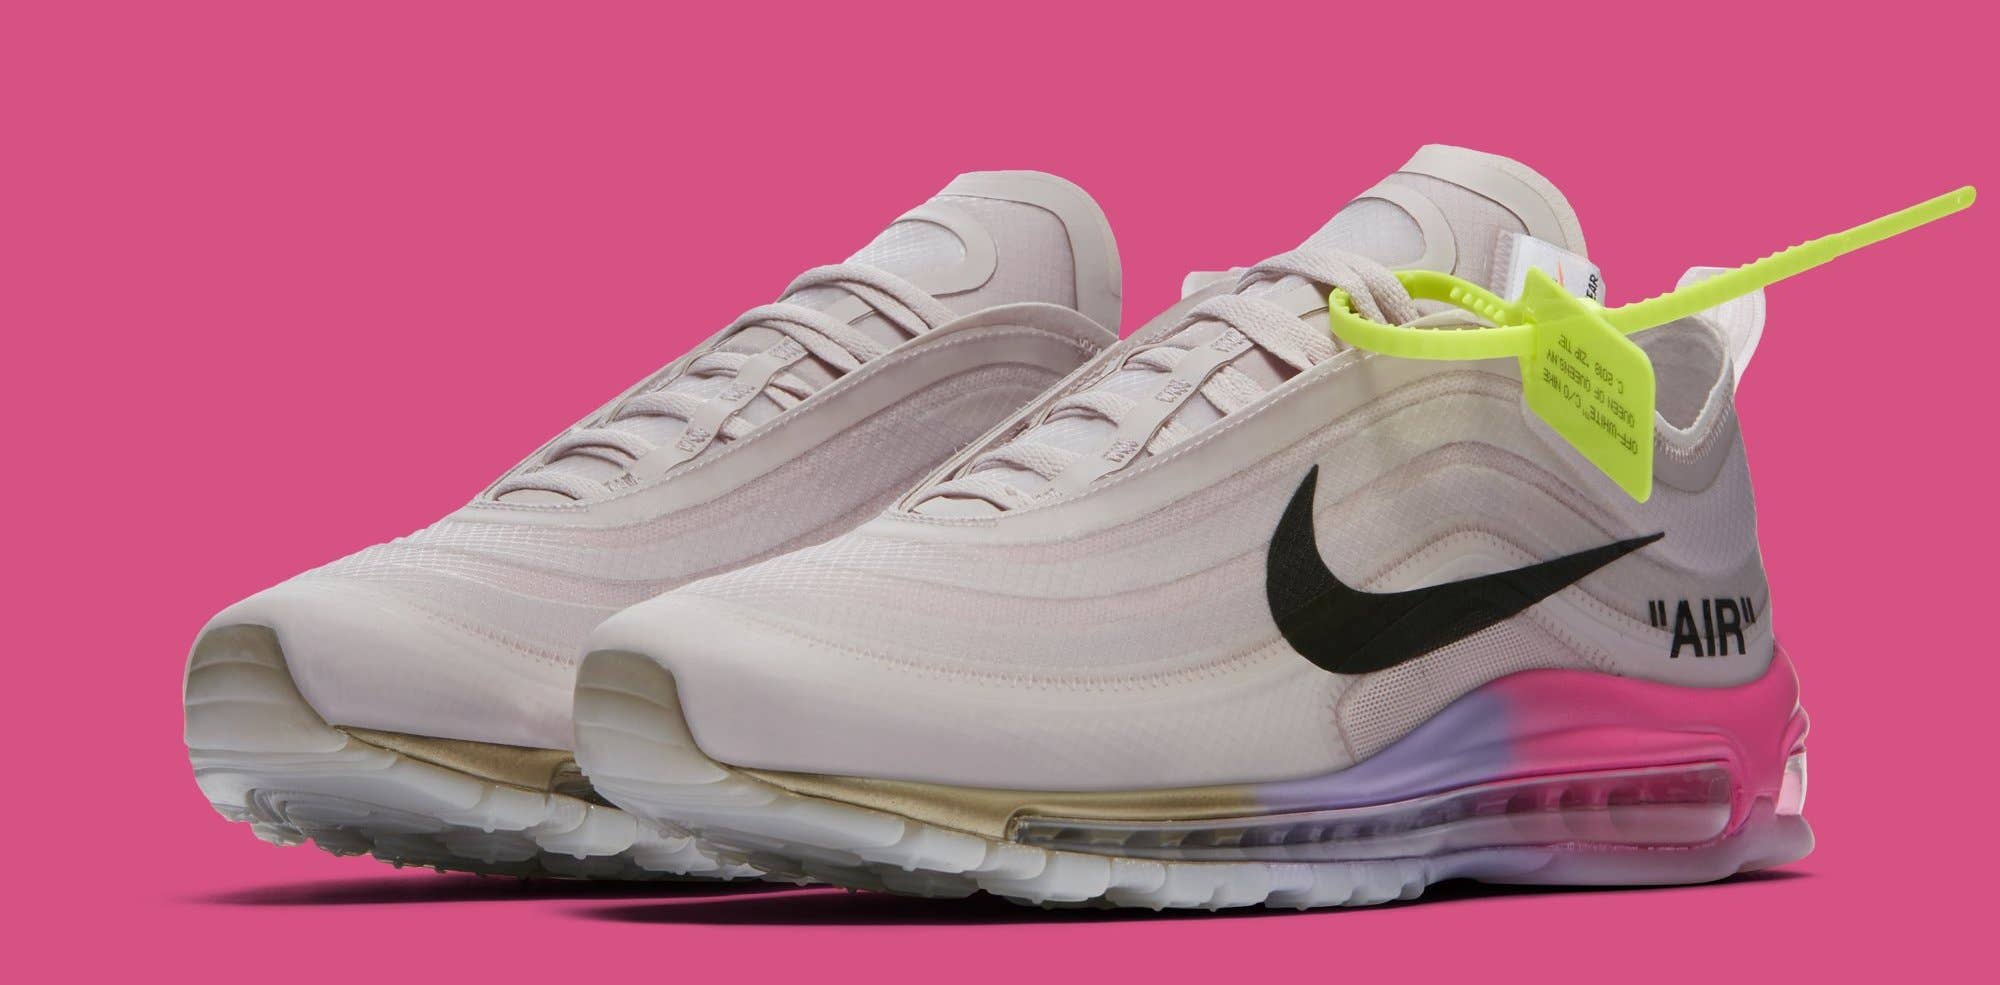 Næsten Tahiti morgenmad Serena Williams' Off-White x Air Max 97s Released Out of Nowhere | Complex